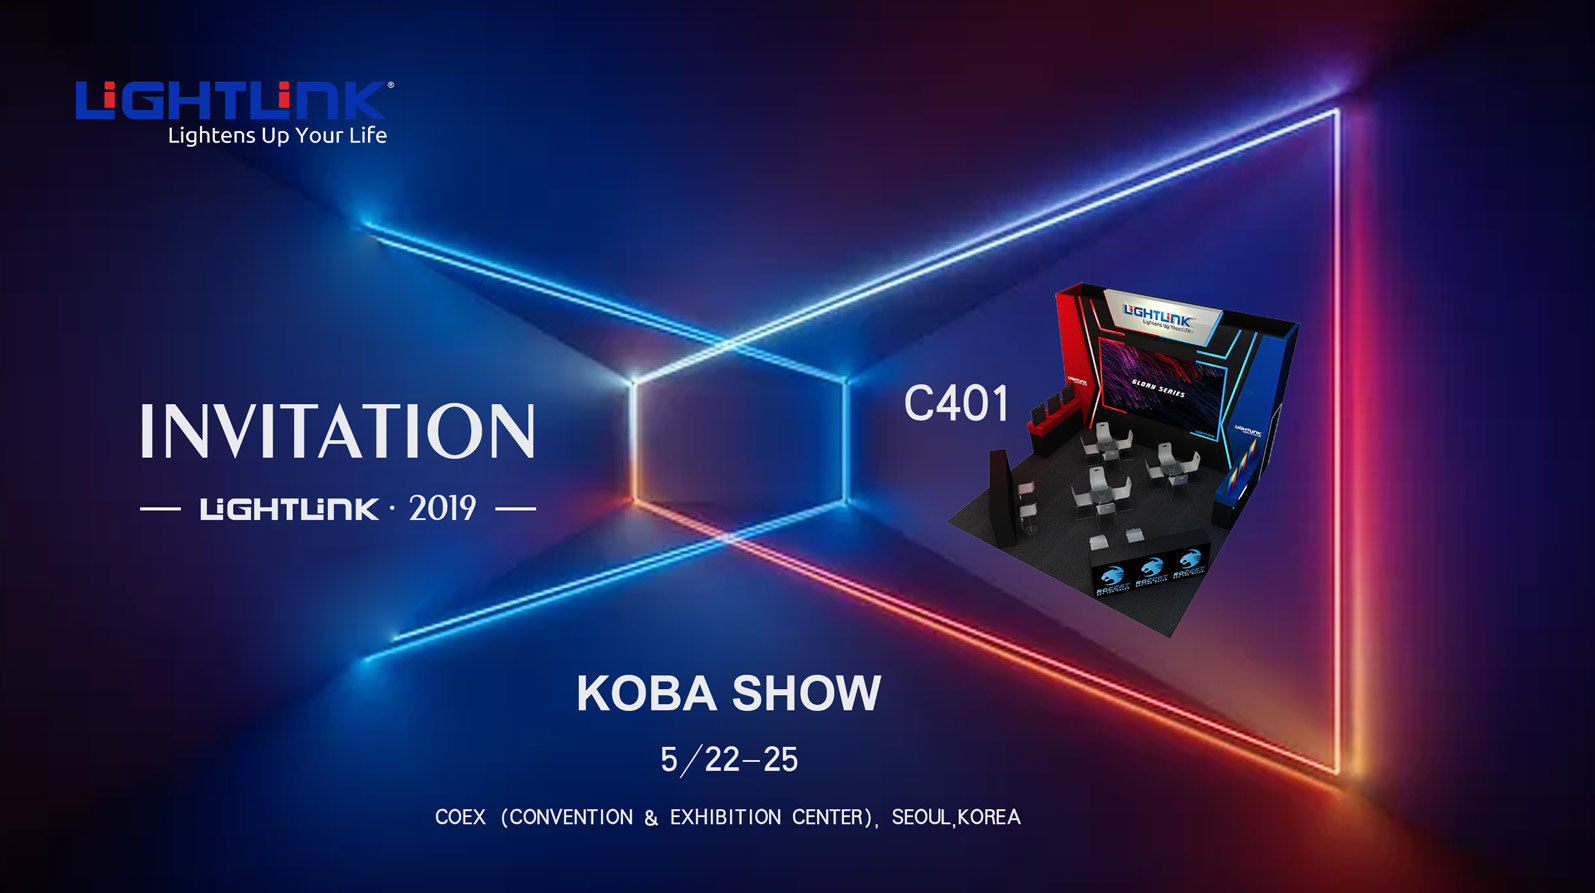 #Lightlink Display will continue its ‘GLORY AND E-SPORTS STORM’ journey at KOBA SHOW 2019